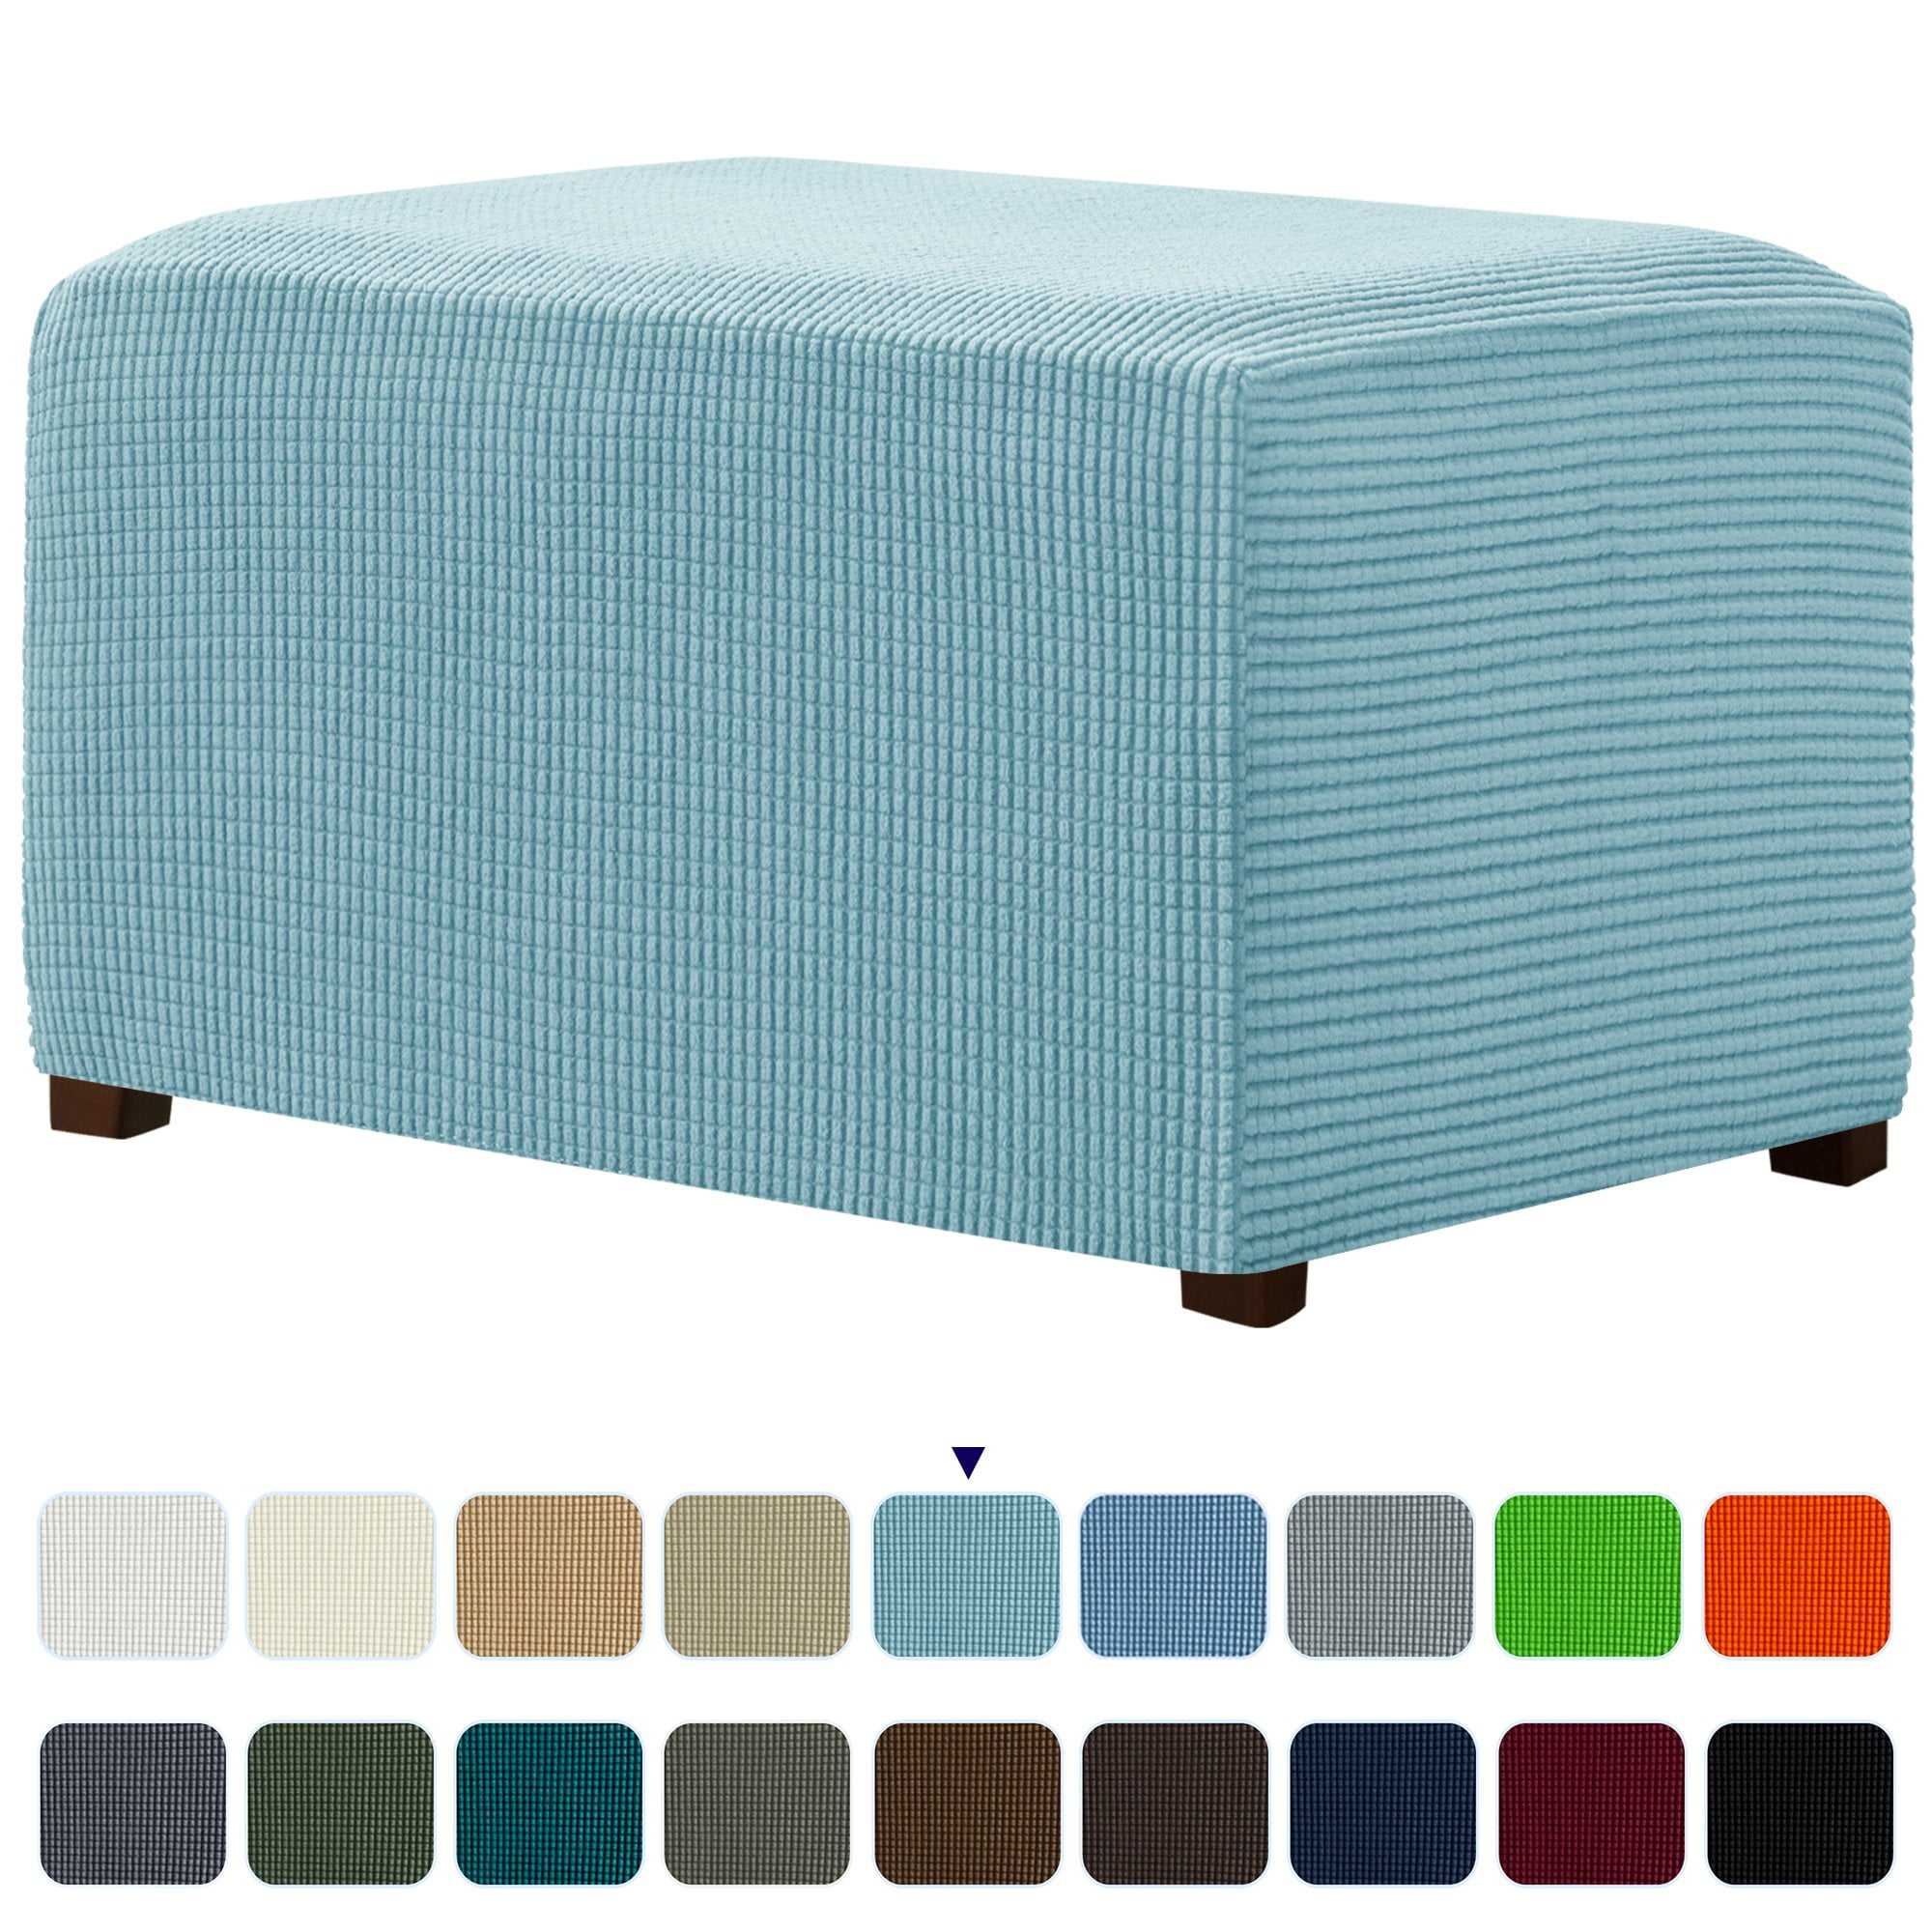 jacquard lake blue,S Stool Protector Cover with Elastic Bottom Dustproof Removable Washable Footrest Pouffe Covers Highdi Square Ottoman Cover Rectangle Stretch Footstool Slipcover